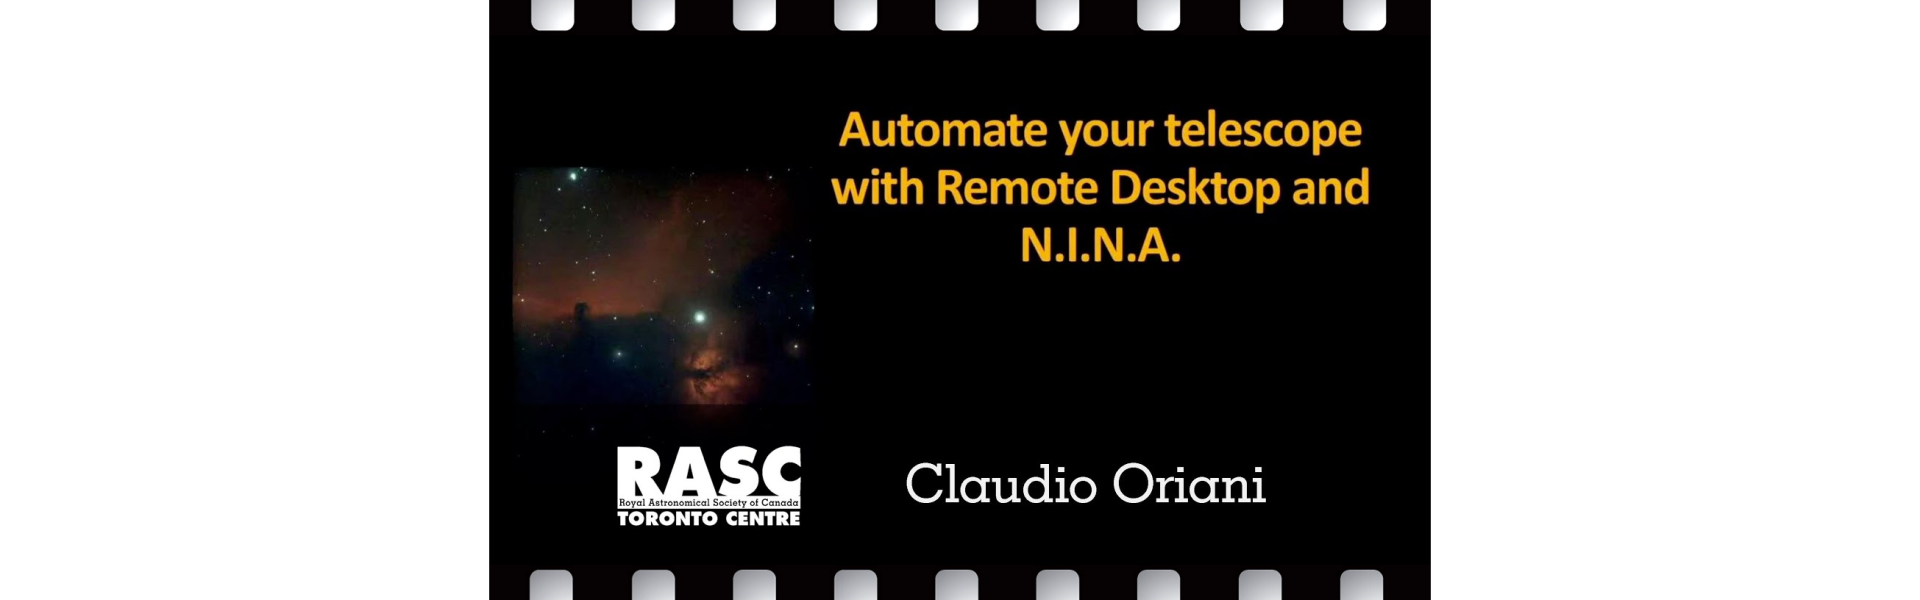 Automate your telescope with Remote Desktop and N.I.N.A.